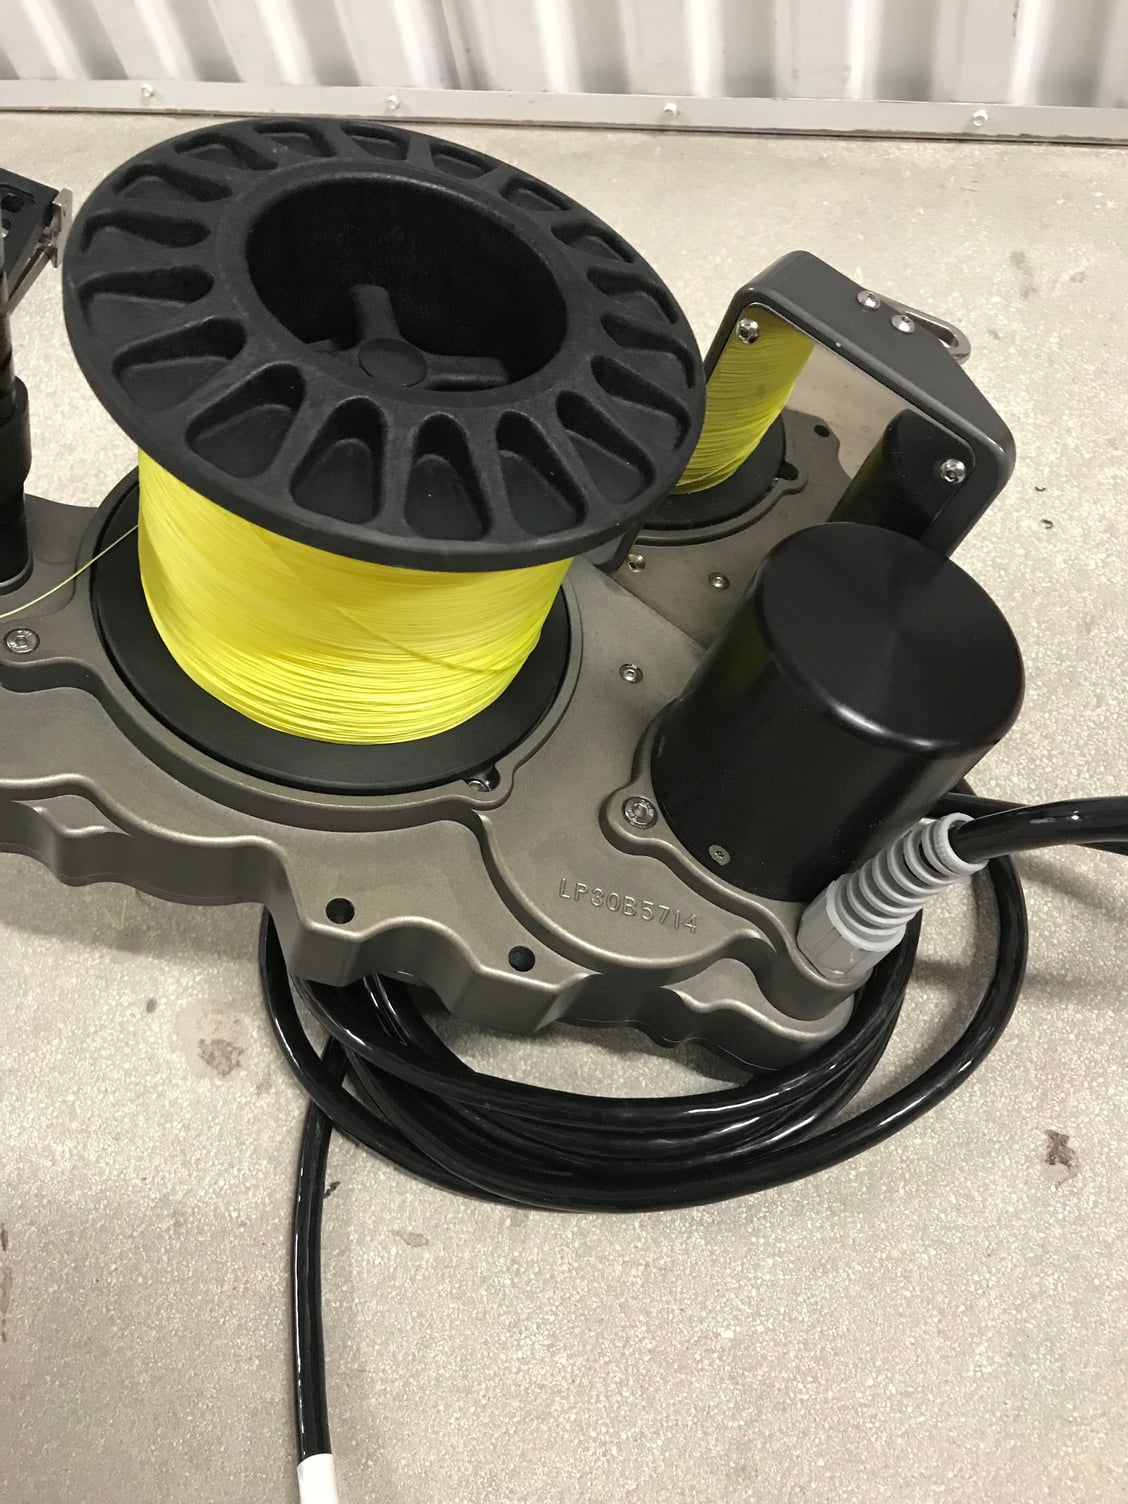 Brand New LP s1200 electric reel, spooled, extra spool, Cutters, lights,  $price reduc - The Hull Truth - Boating and Fishing Forum